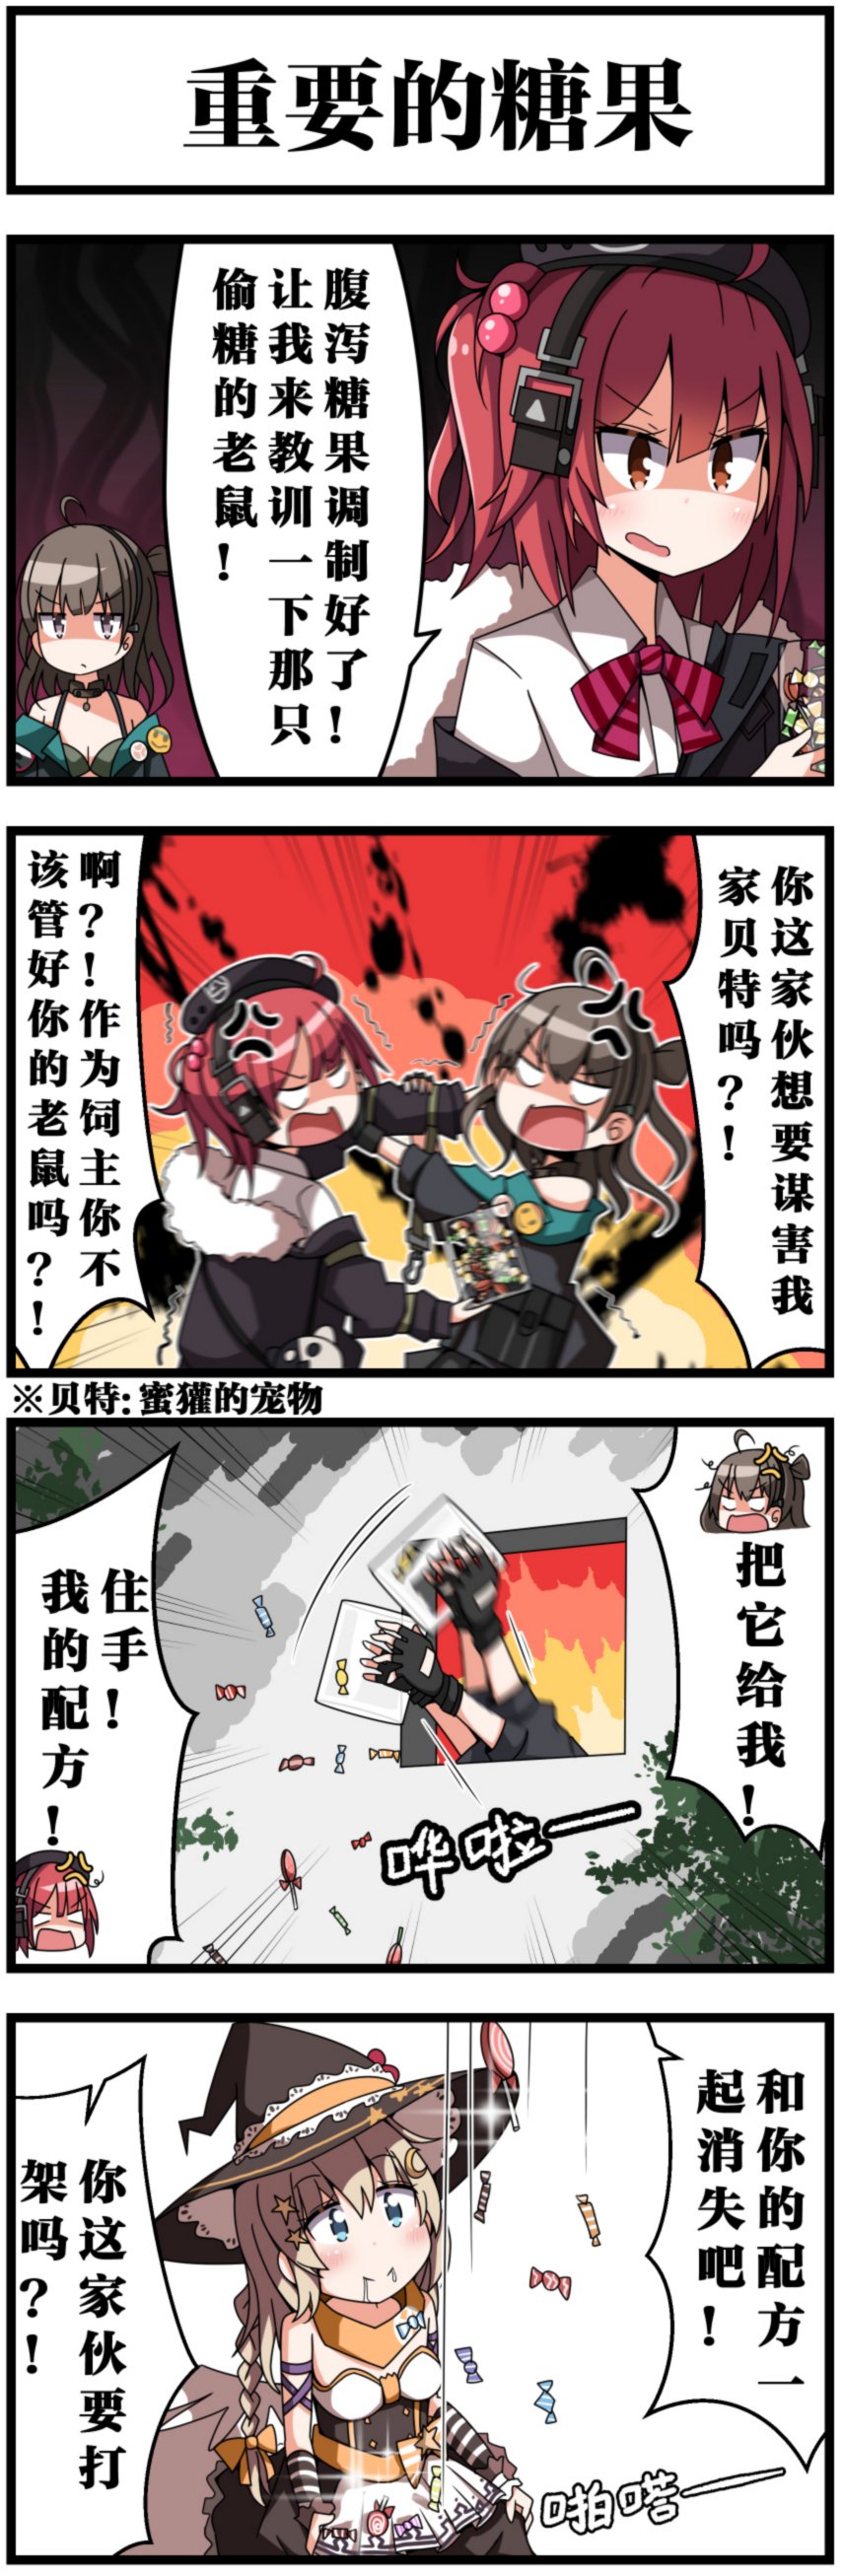 2girls 3girls 4koma absurdres anger_vein breasts brown_hair candy cleavage comic drooling fn_fnc_(girls_frontline) food girls_frontline hat headphones highres honey_badger_(girls_frontline) jacket long_braid mp7_(girls_frontline) multiple_girls open_mouth redhead throwing translation_request window witch_hat